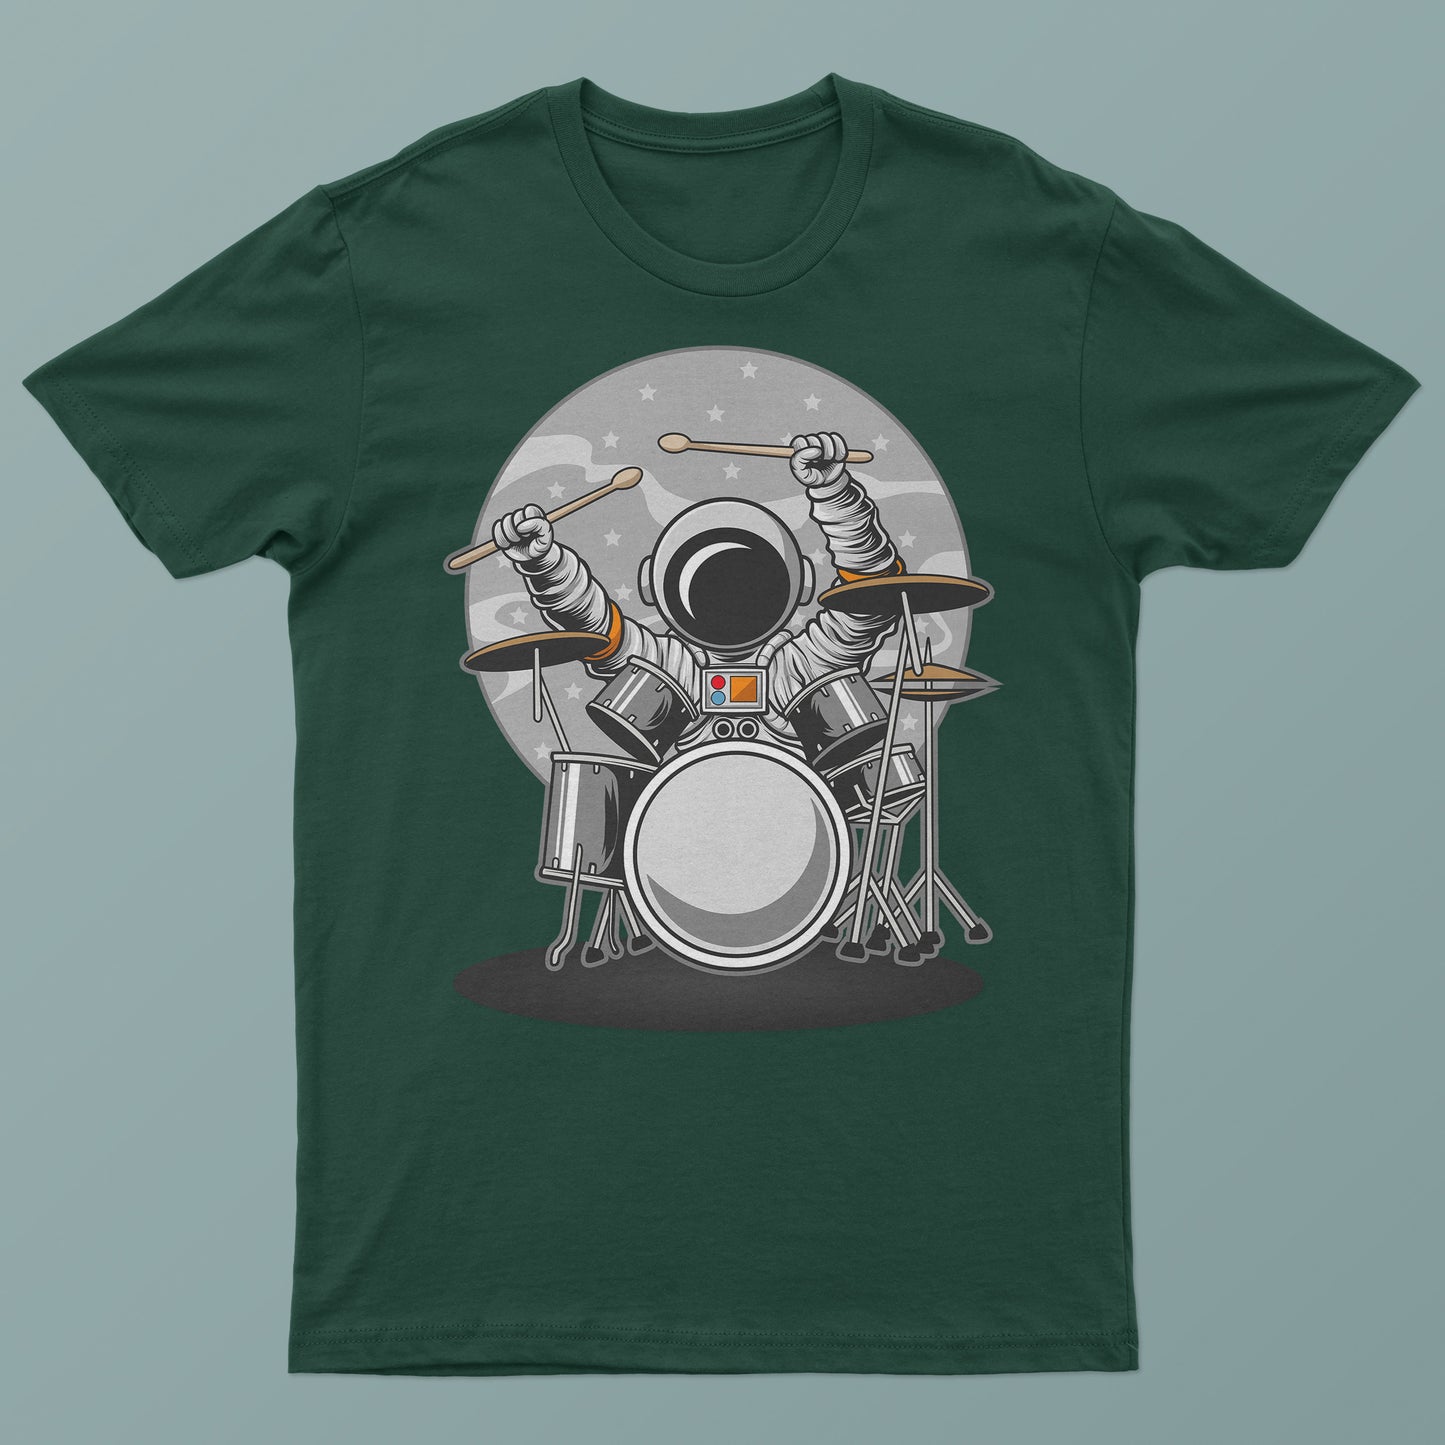 Astronaut Drummer in Space T-shirt - Cosmic Grooves and Unique Style Tee!